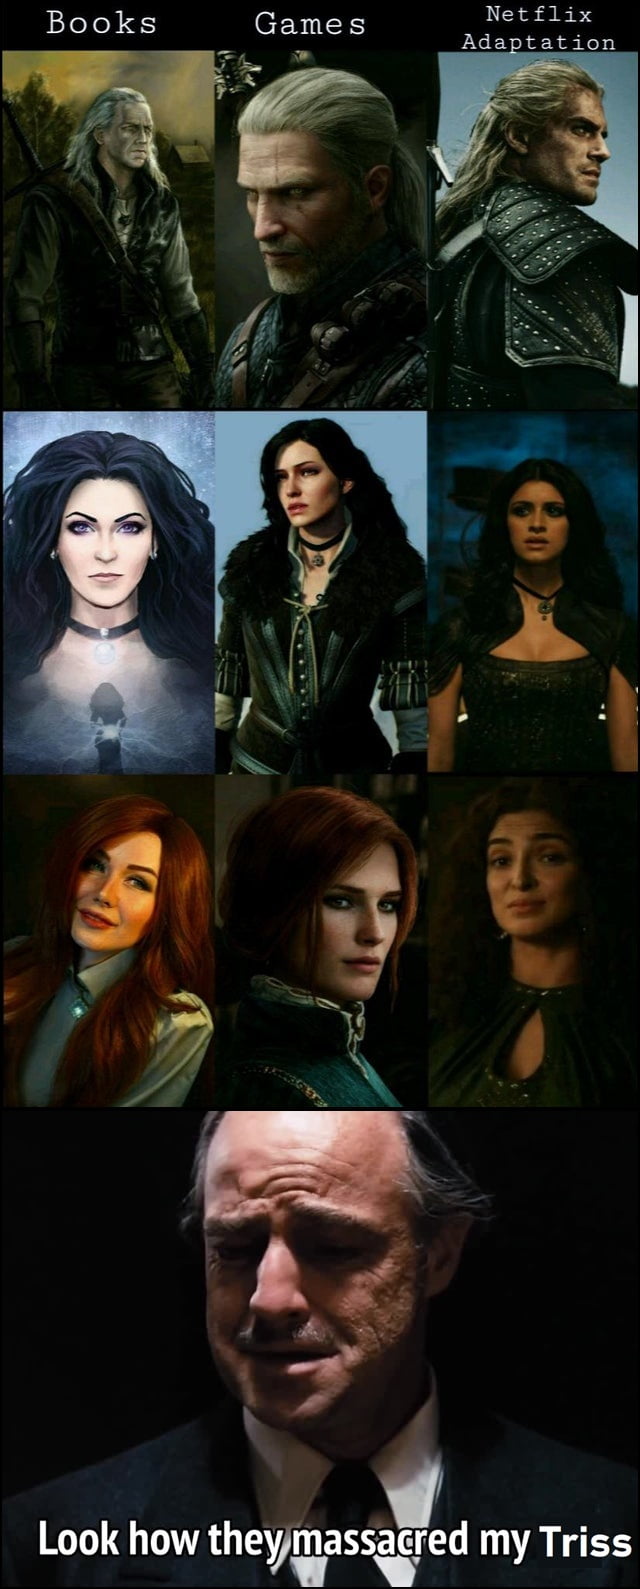 meme the witcher - Books Games Netflix Adaptation Look how they massacred my Triss